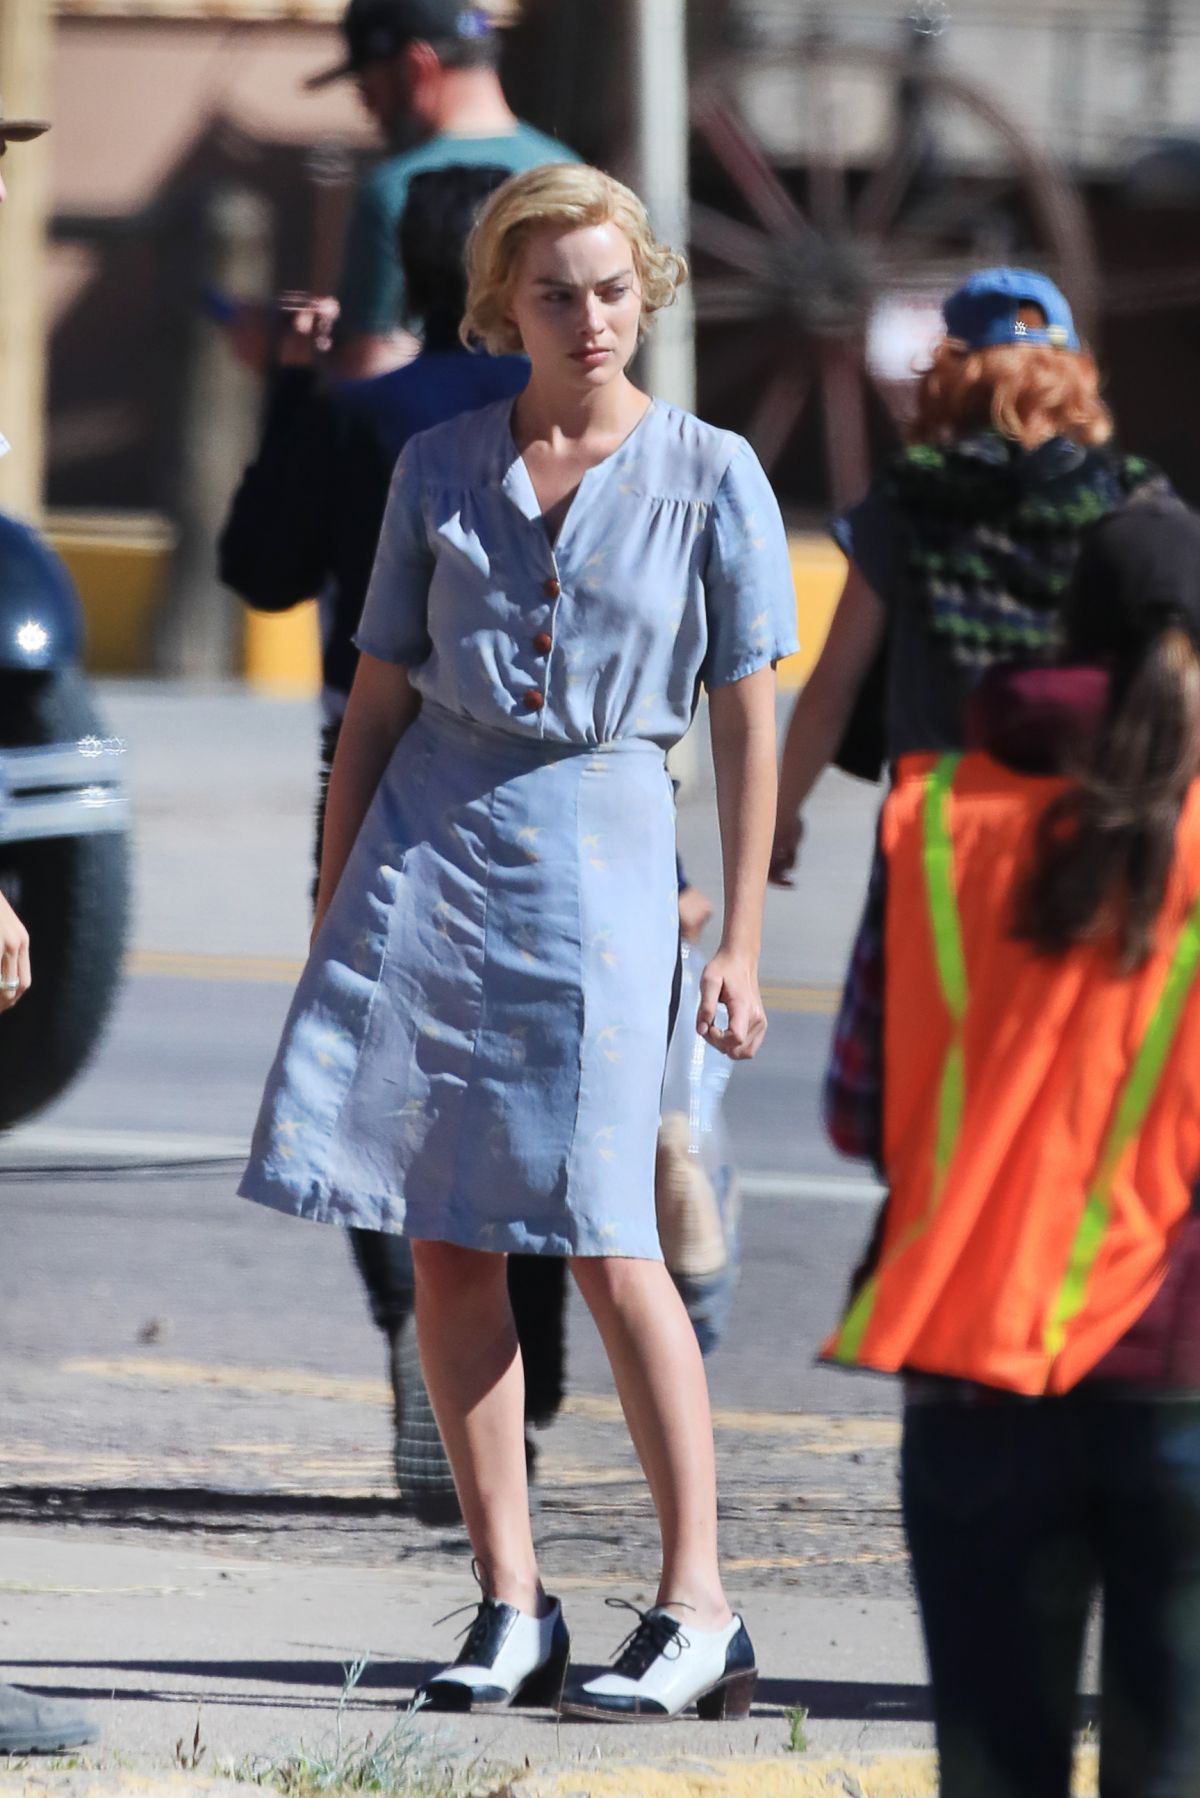 margot-robbie-on-the-set-of-dreamland-in-new-mexico-10-26-2017-10.jpg